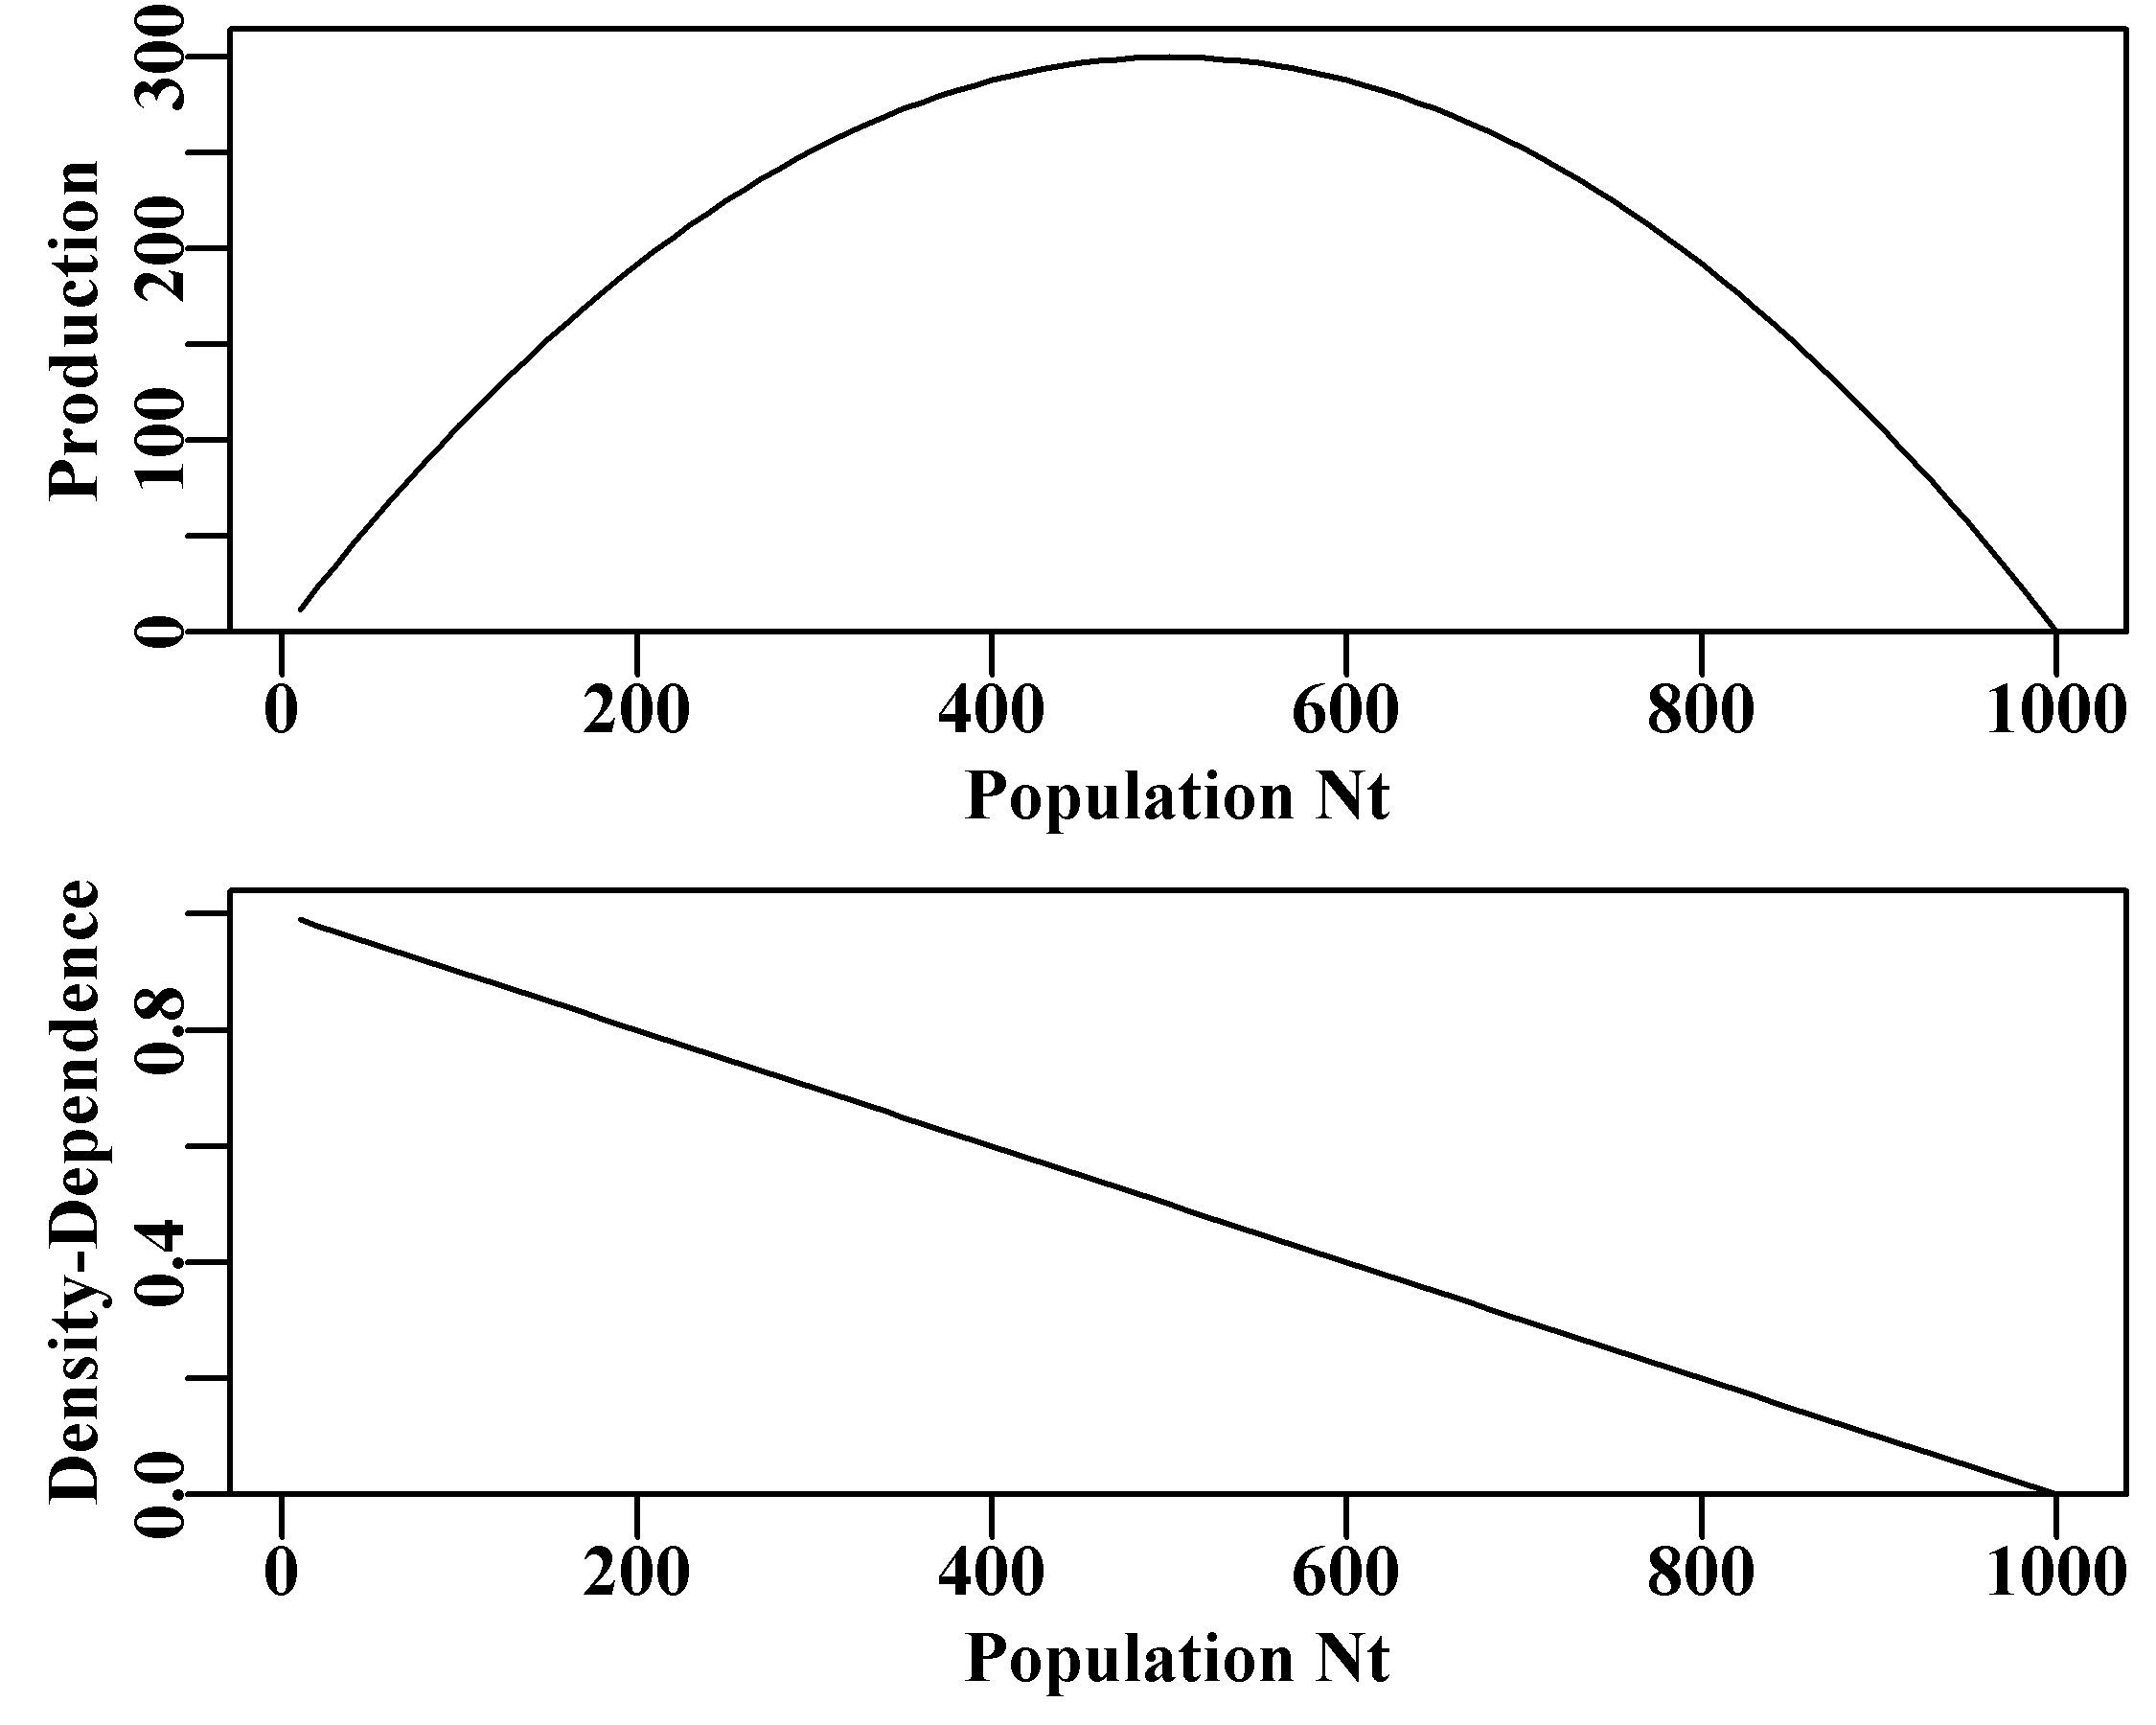 The full production curve for the discrete Schaefer (1954, 1957) surplus production model and the equivalent implied linear density dependent relationship with population size.